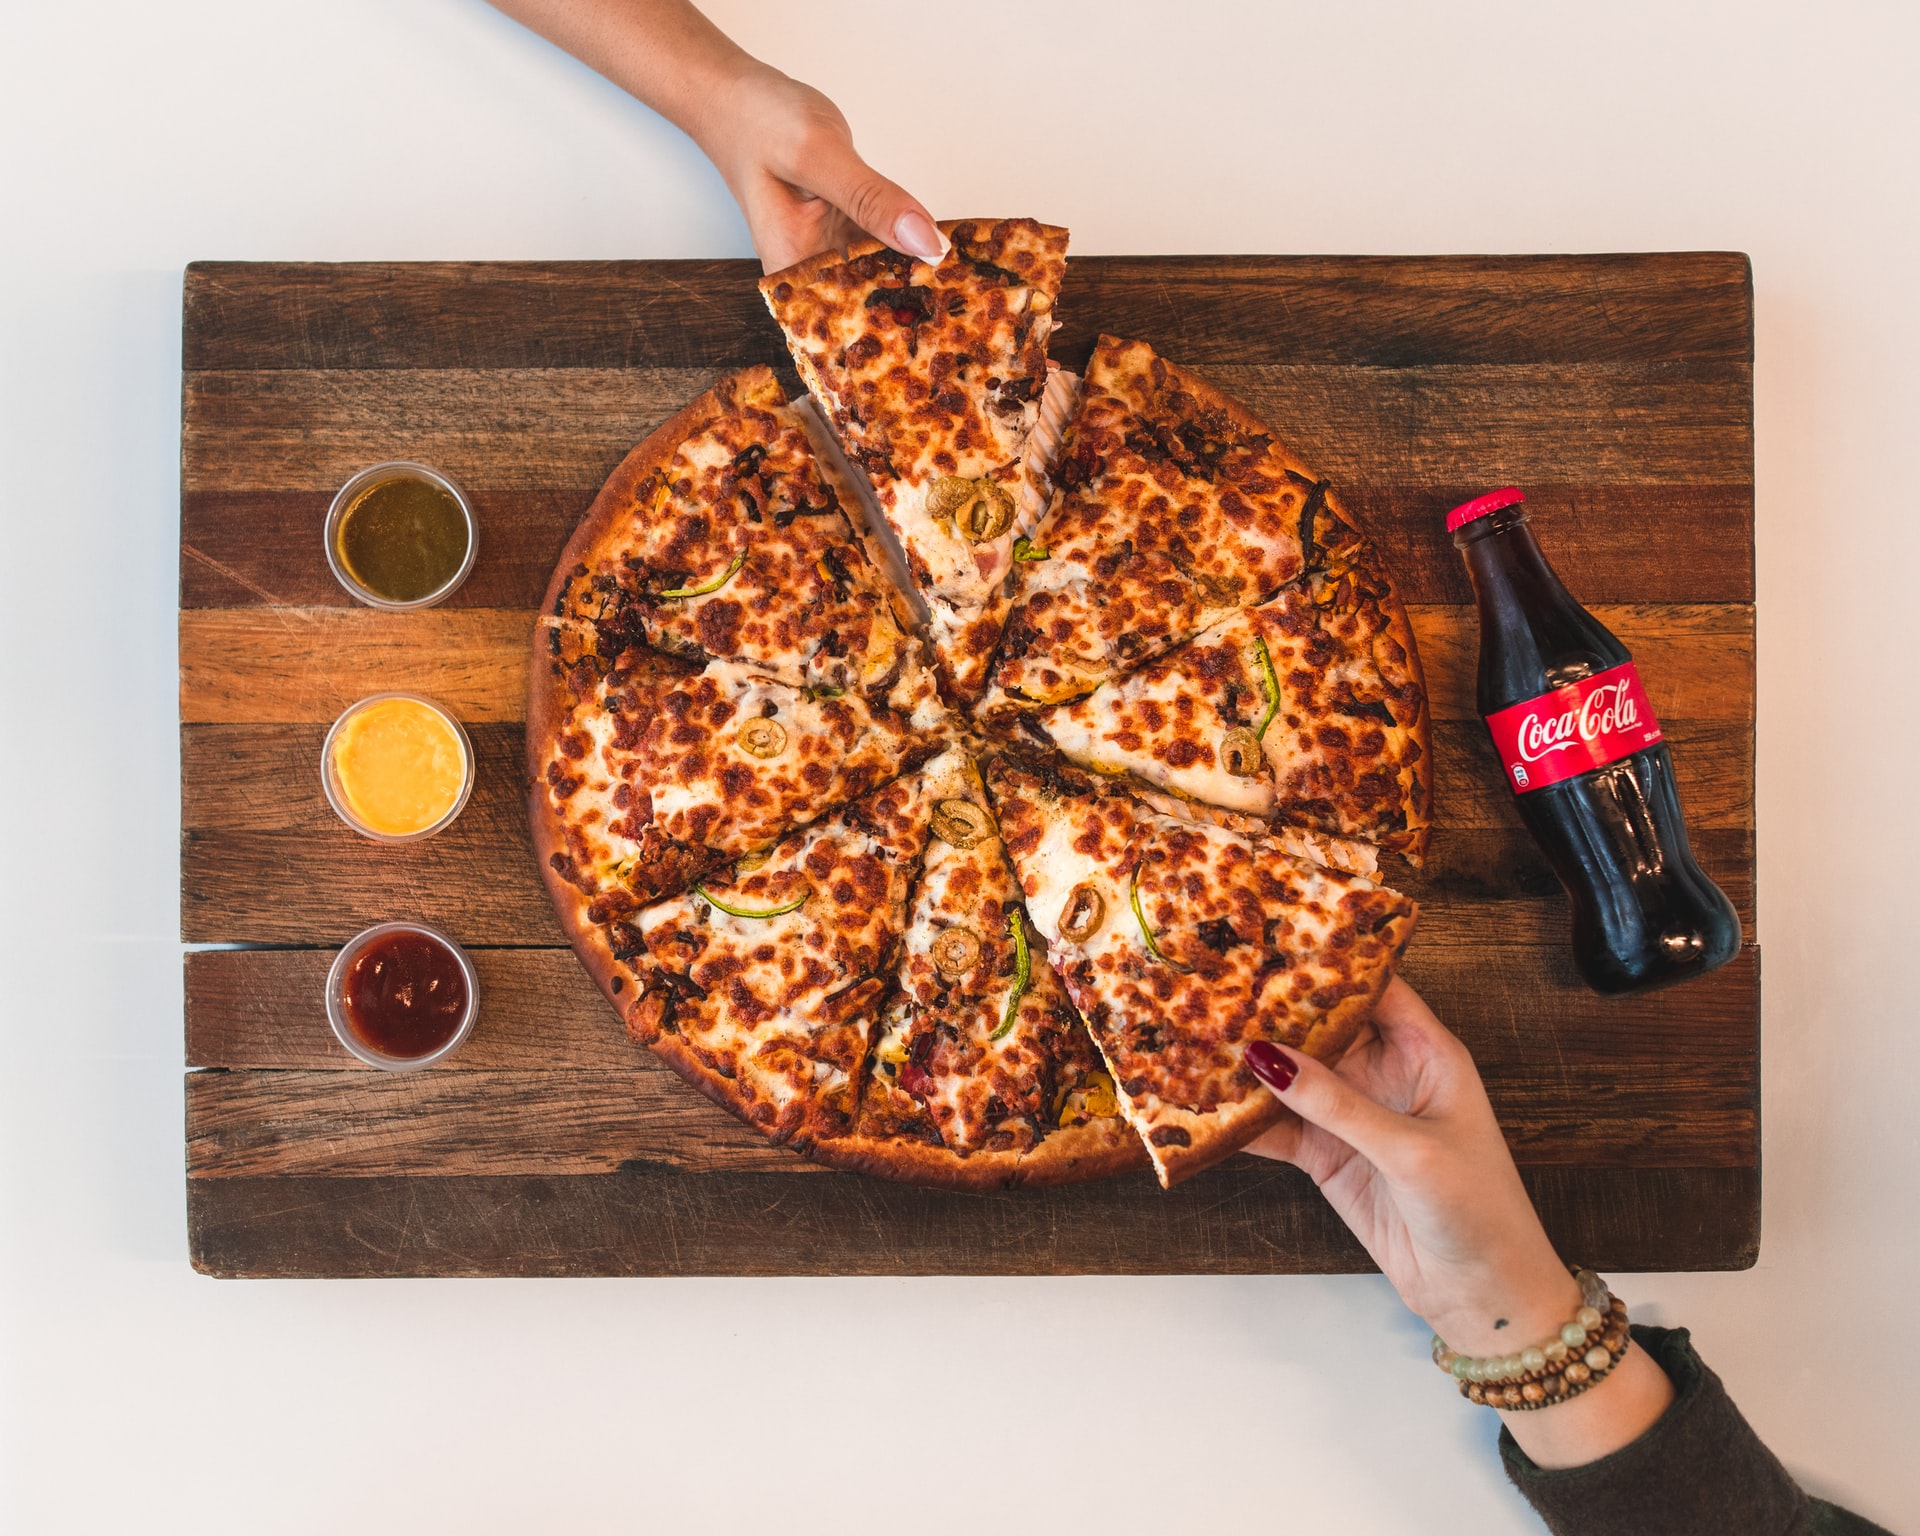 job search health doesn't come from pizza and coke